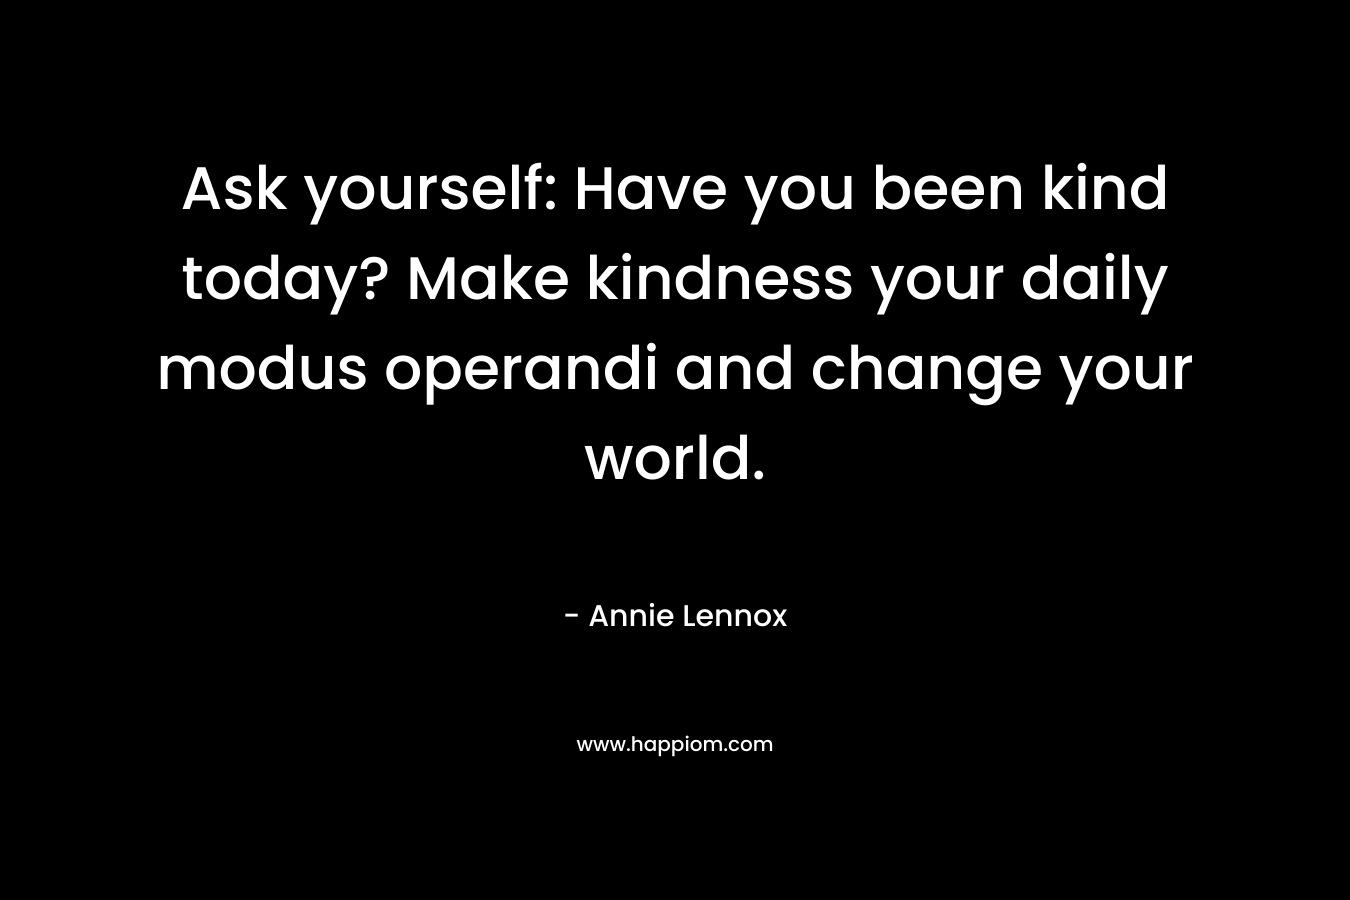 Ask yourself: Have you been kind today? Make kindness your daily modus operandi and change your world. – Annie Lennox